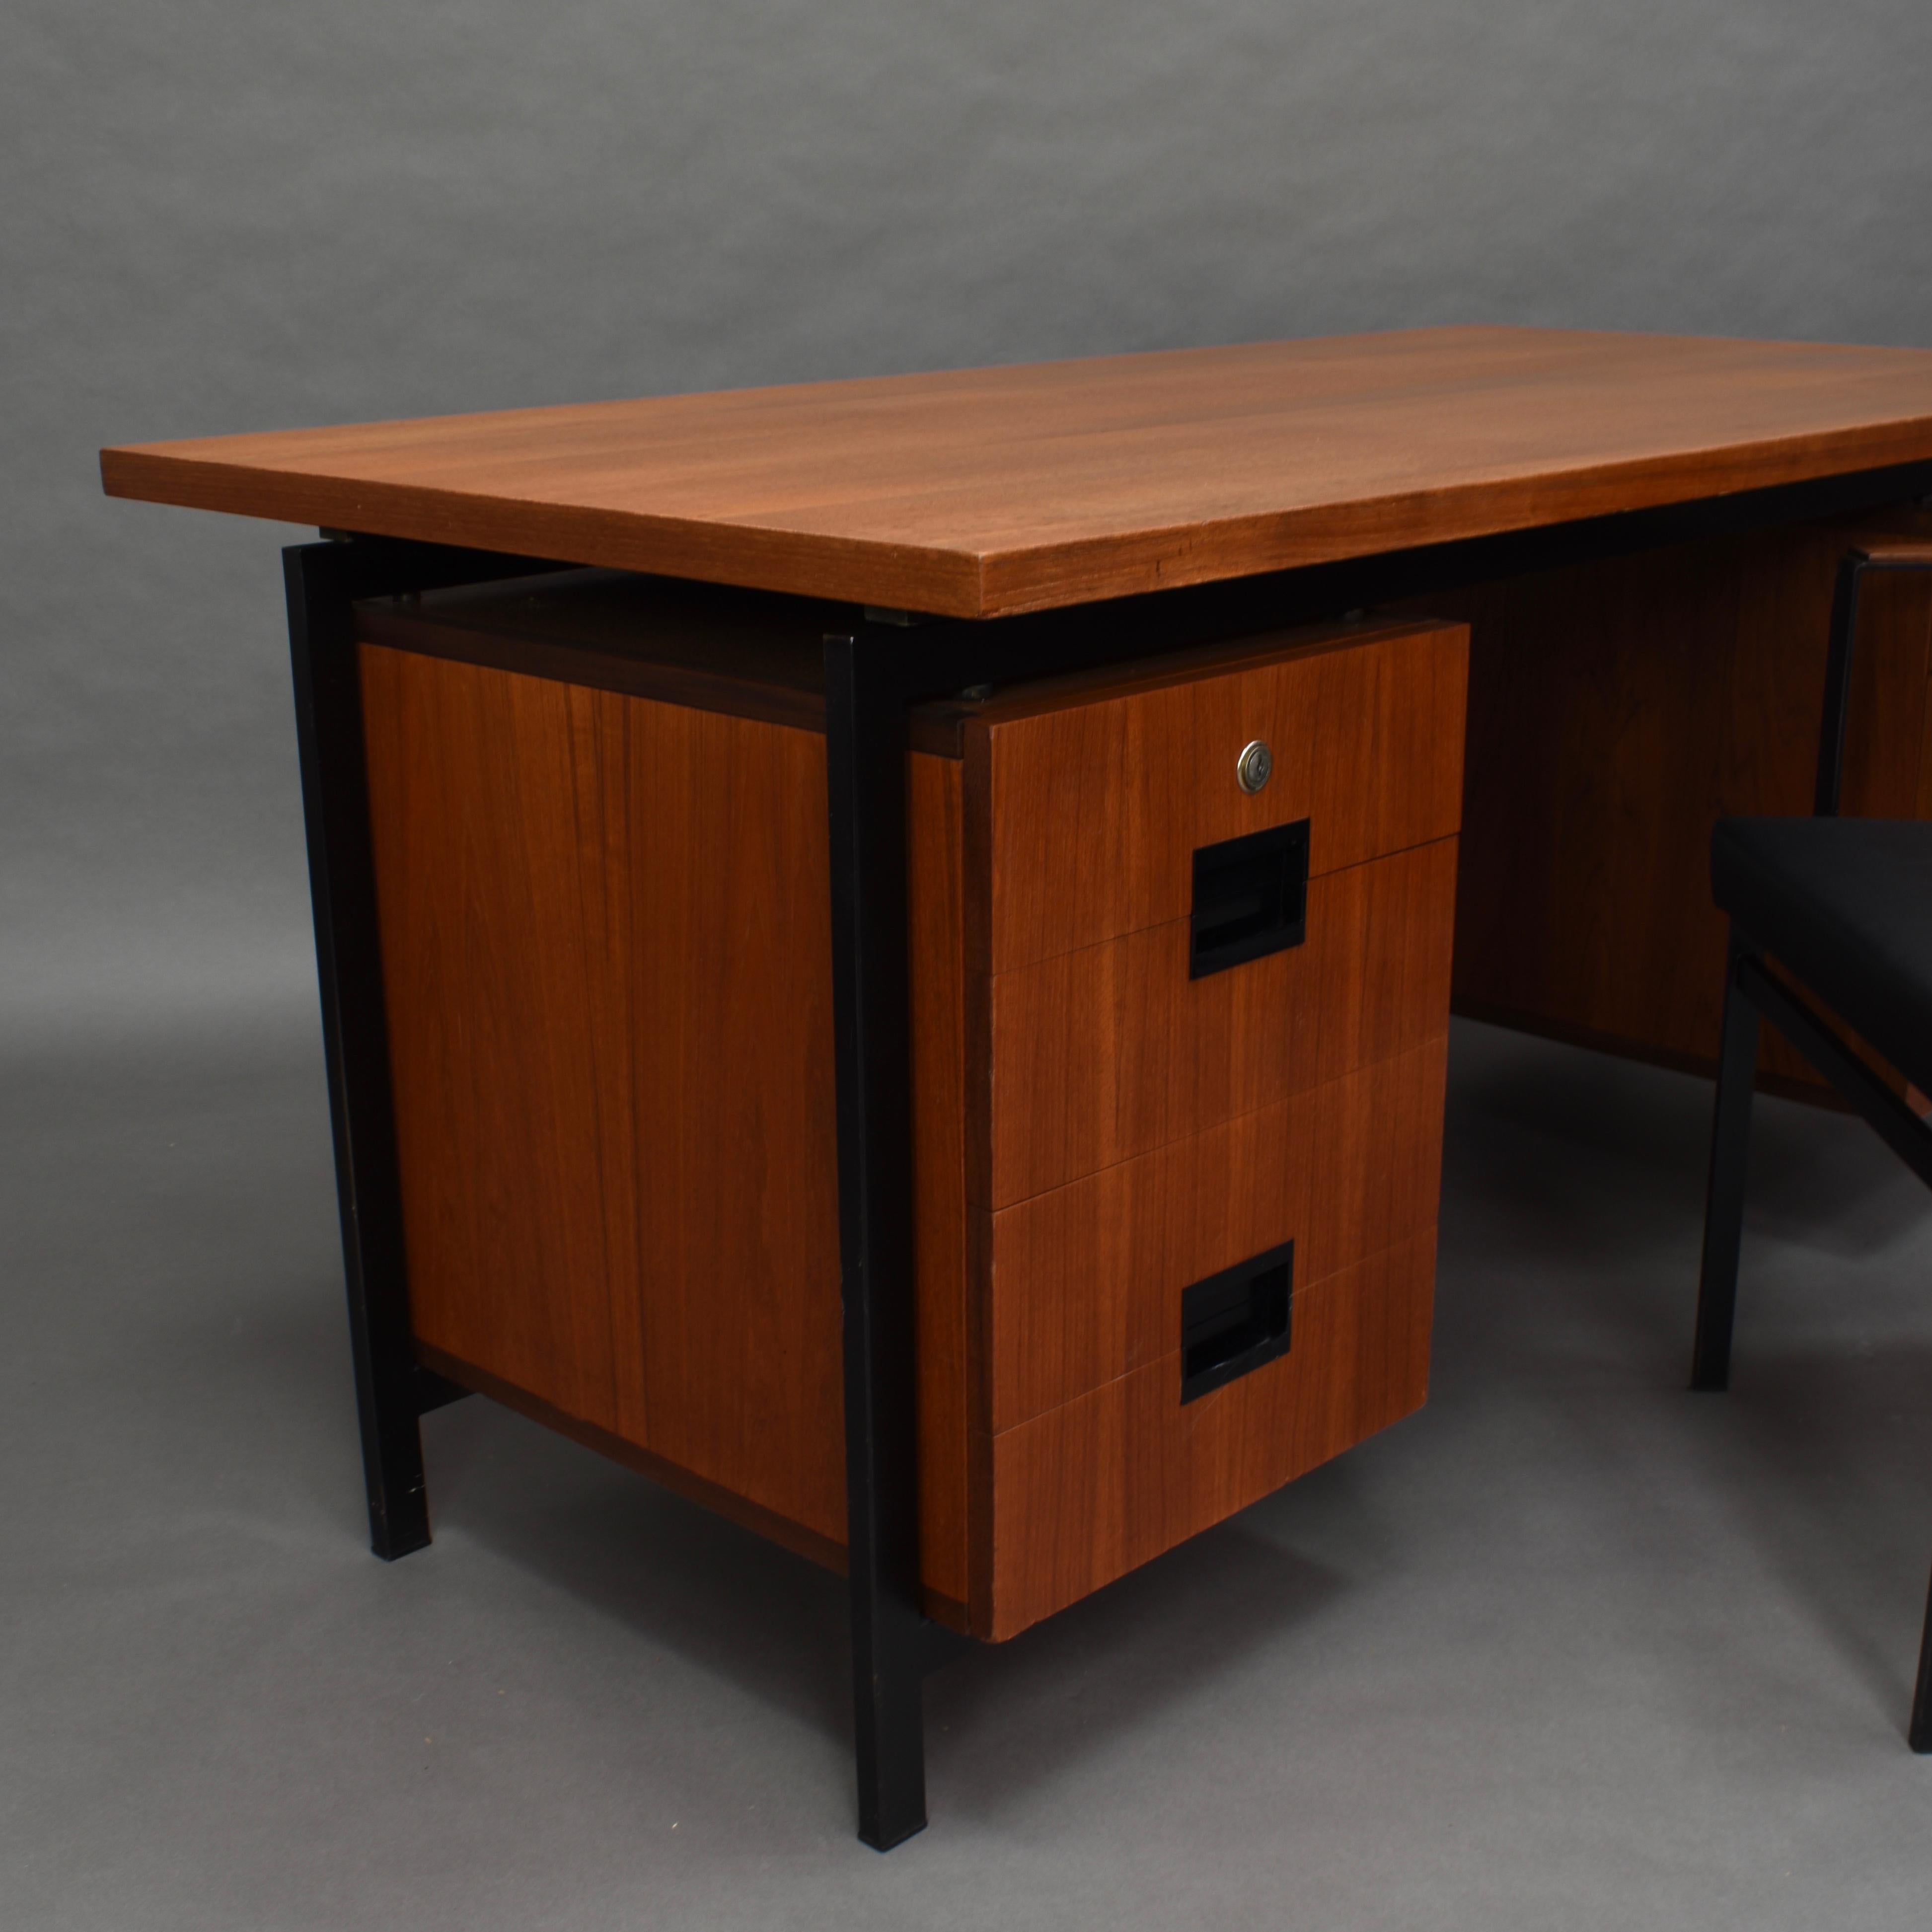 Cees Braakman for Pastoe Model EU02 Japanese Series Desk and Chair in Teak, 1950 For Sale 5